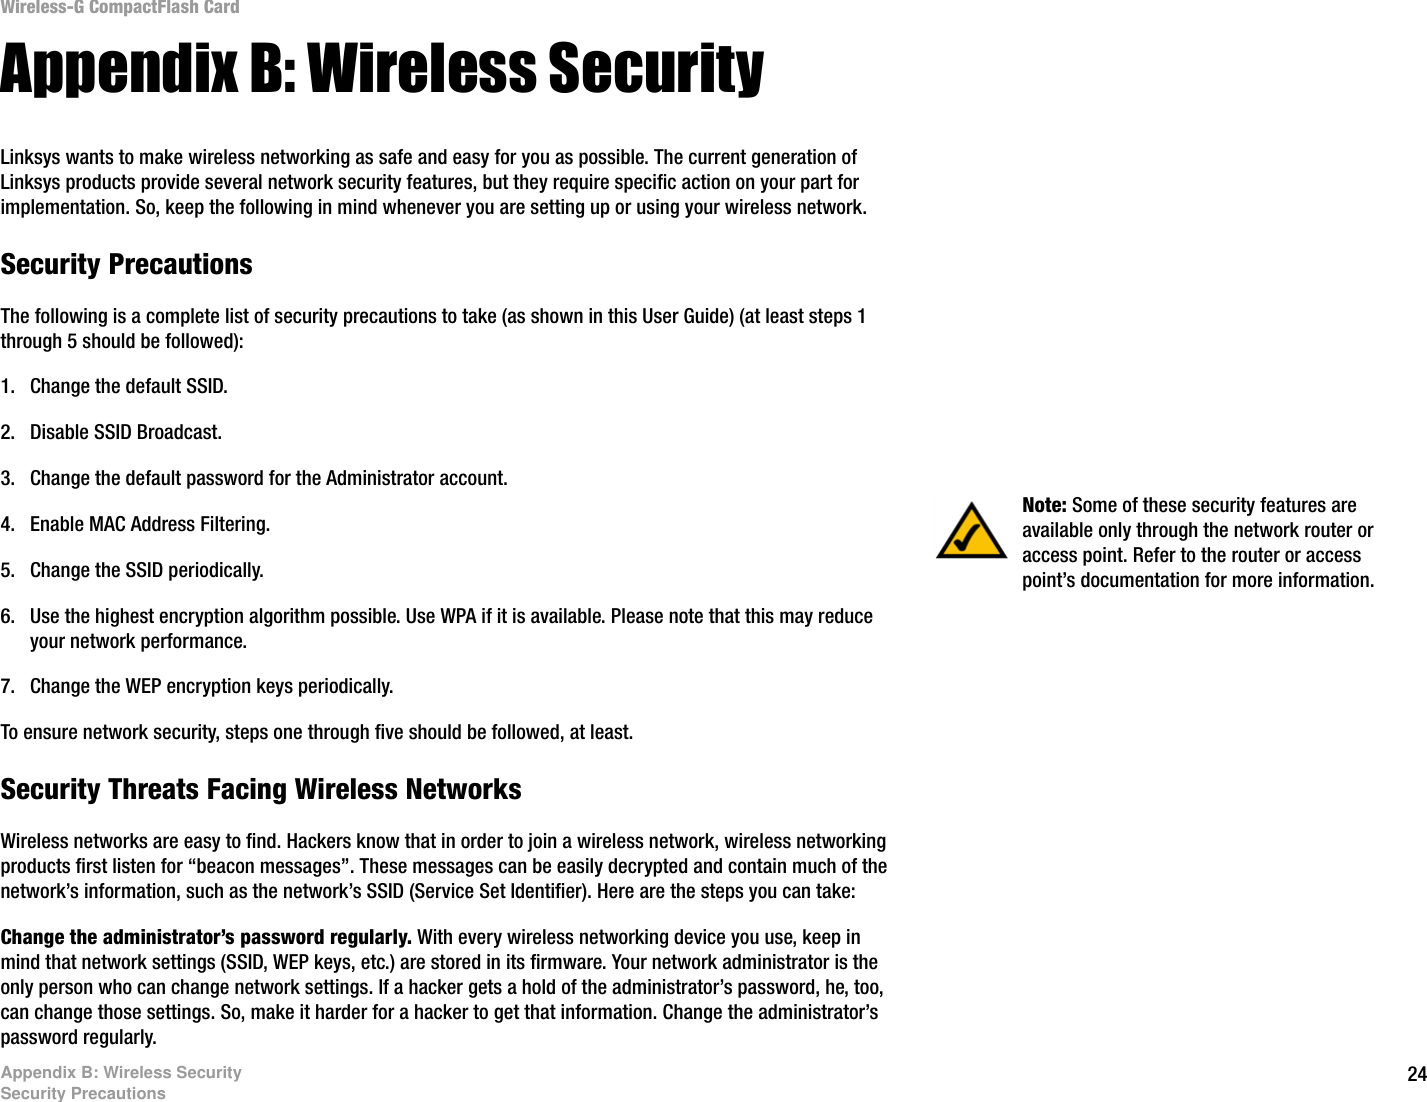 24Appendix B: Wireless SecuritySecurity PrecautionsWireless-G CompactFlash CardAppendix B: Wireless SecurityLinksys wants to make wireless networking as safe and easy for you as possible. The current generation of Linksys products provide several network security features, but they require specific action on your part for implementation. So, keep the following in mind whenever you are setting up or using your wireless network.Security PrecautionsThe following is a complete list of security precautions to take (as shown in this User Guide) (at least steps 1 through 5 should be followed):1. Change the default SSID. 2. Disable SSID Broadcast. 3. Change the default password for the Administrator account. 4. Enable MAC Address Filtering. 5. Change the SSID periodically. 6. Use the highest encryption algorithm possible. Use WPA if it is available. Please note that this may reduce your network performance. 7. Change the WEP encryption keys periodically. To ensure network security, steps one through five should be followed, at least.Security Threats Facing Wireless Networks Wireless networks are easy to find. Hackers know that in order to join a wireless network, wireless networking products first listen for “beacon messages”. These messages can be easily decrypted and contain much of the network’s information, such as the network’s SSID (Service Set Identifier). Here are the steps you can take:Change the administrator’s password regularly. With every wireless networking device you use, keep in mind that network settings (SSID, WEP keys, etc.) are stored in its firmware. Your network administrator is the only person who can change network settings. If a hacker gets a hold of the administrator’s password, he, too, can change those settings. So, make it harder for a hacker to get that information. Change the administrator’s password regularly.Note: Some of these security features are available only through the network router or access point. Refer to the router or access point’s documentation for more information.